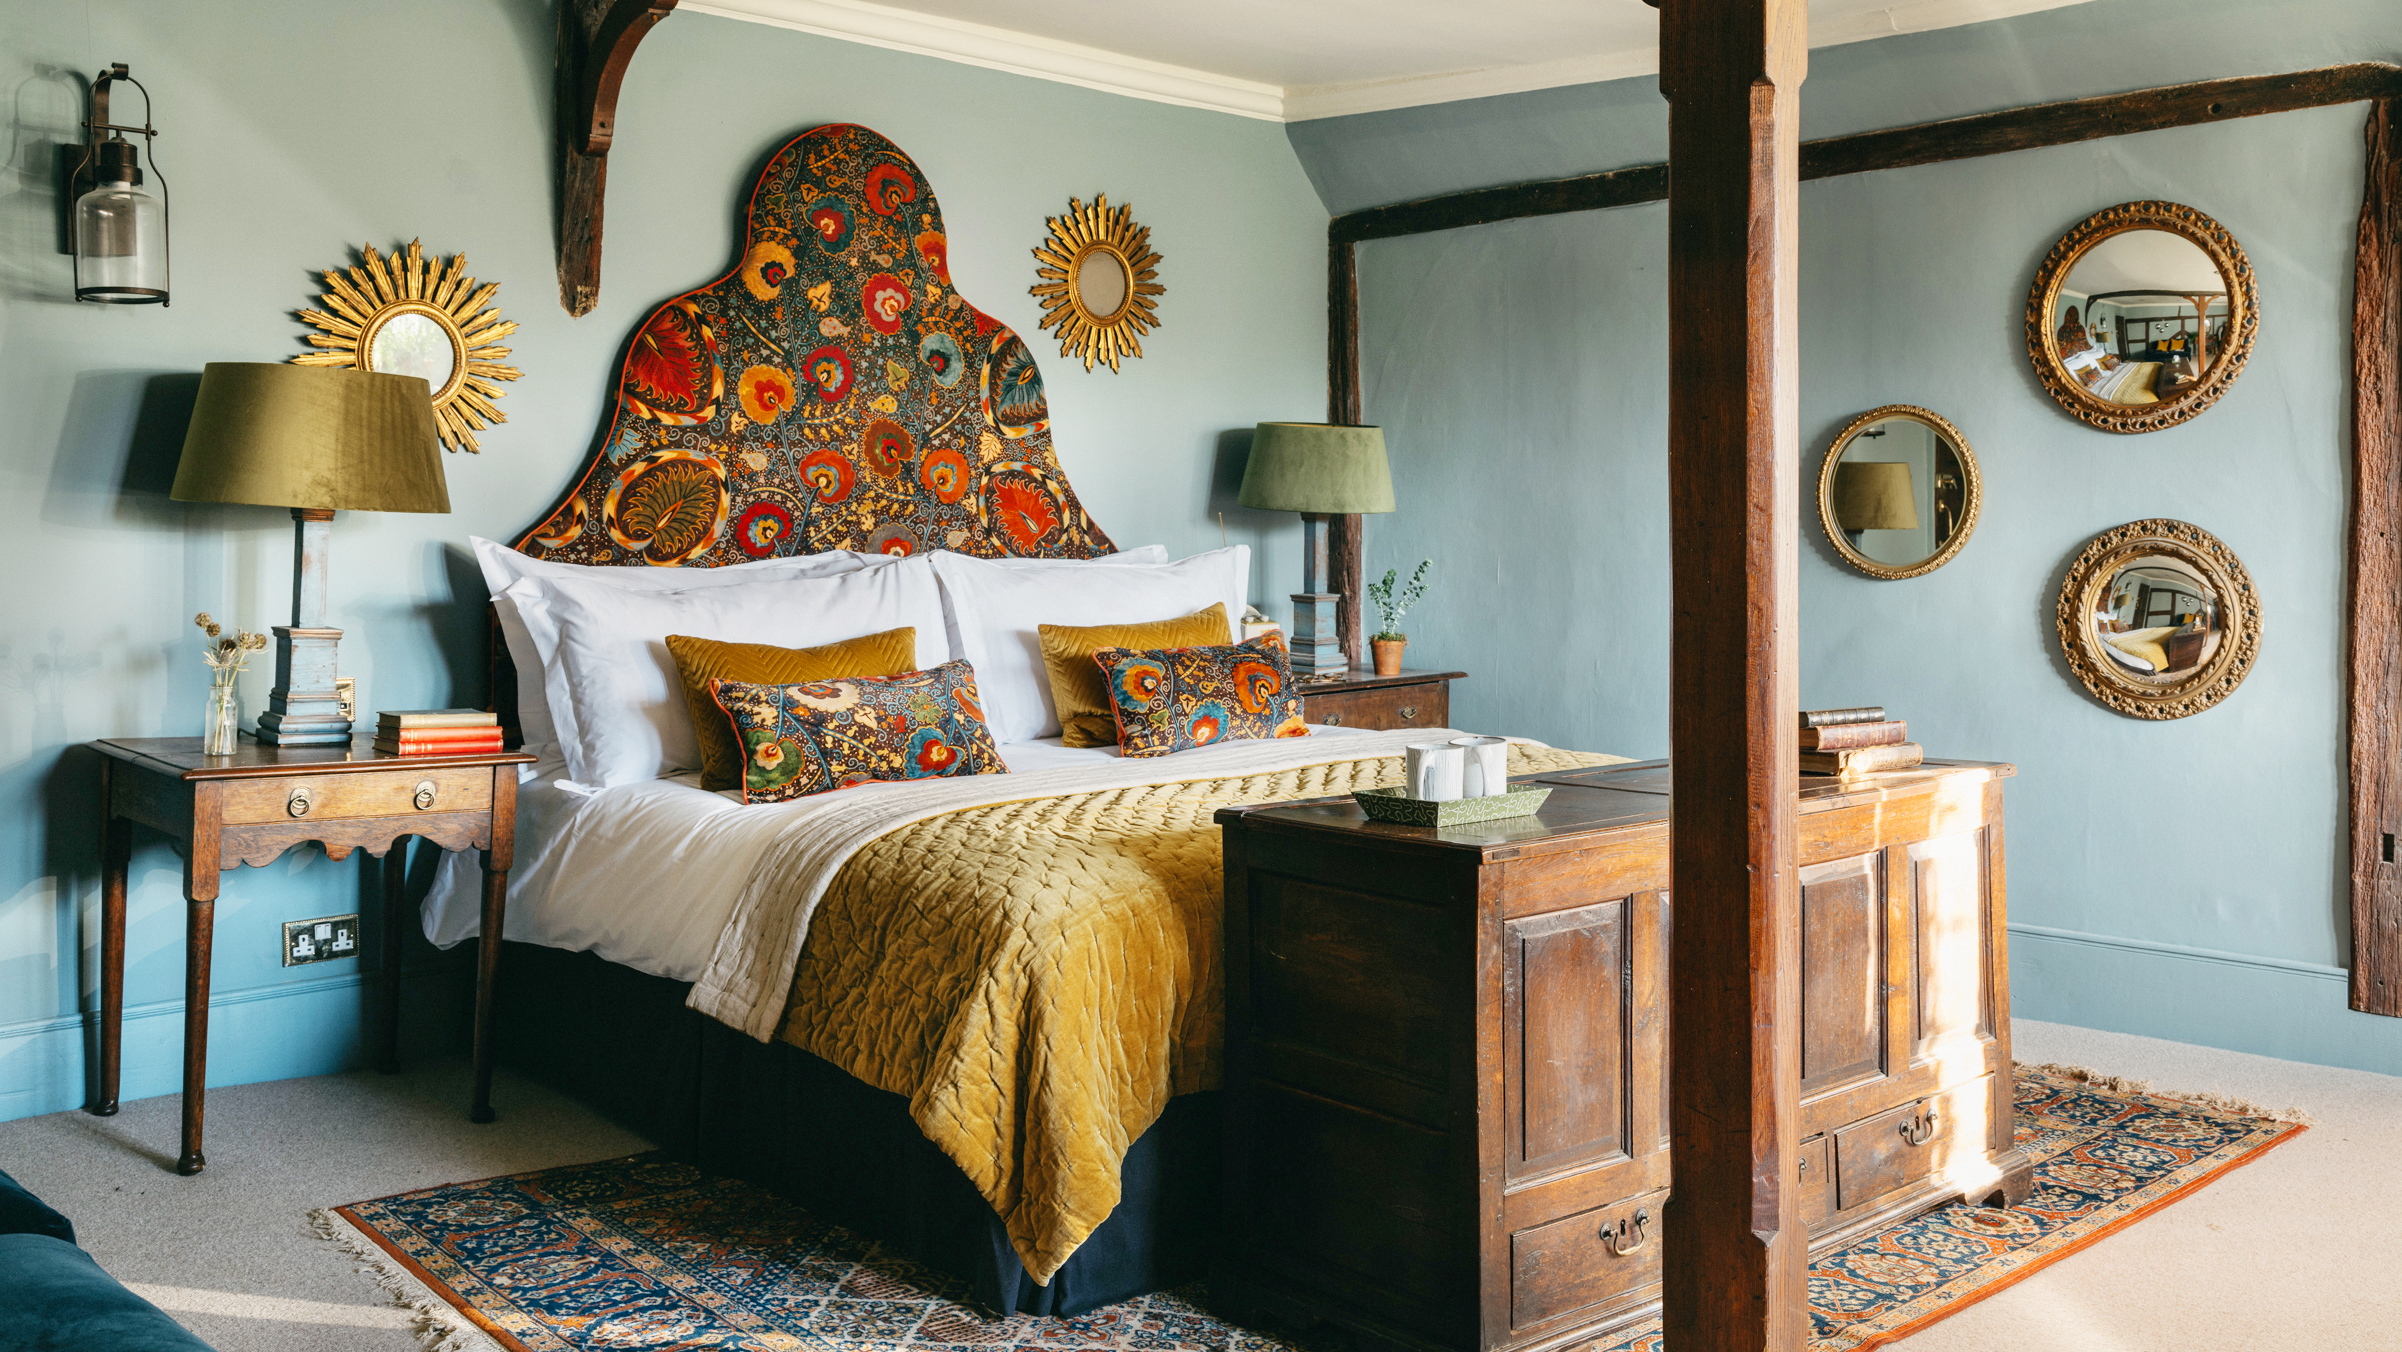 The hotel’s nine rooms are beautifully designed, with intricate details